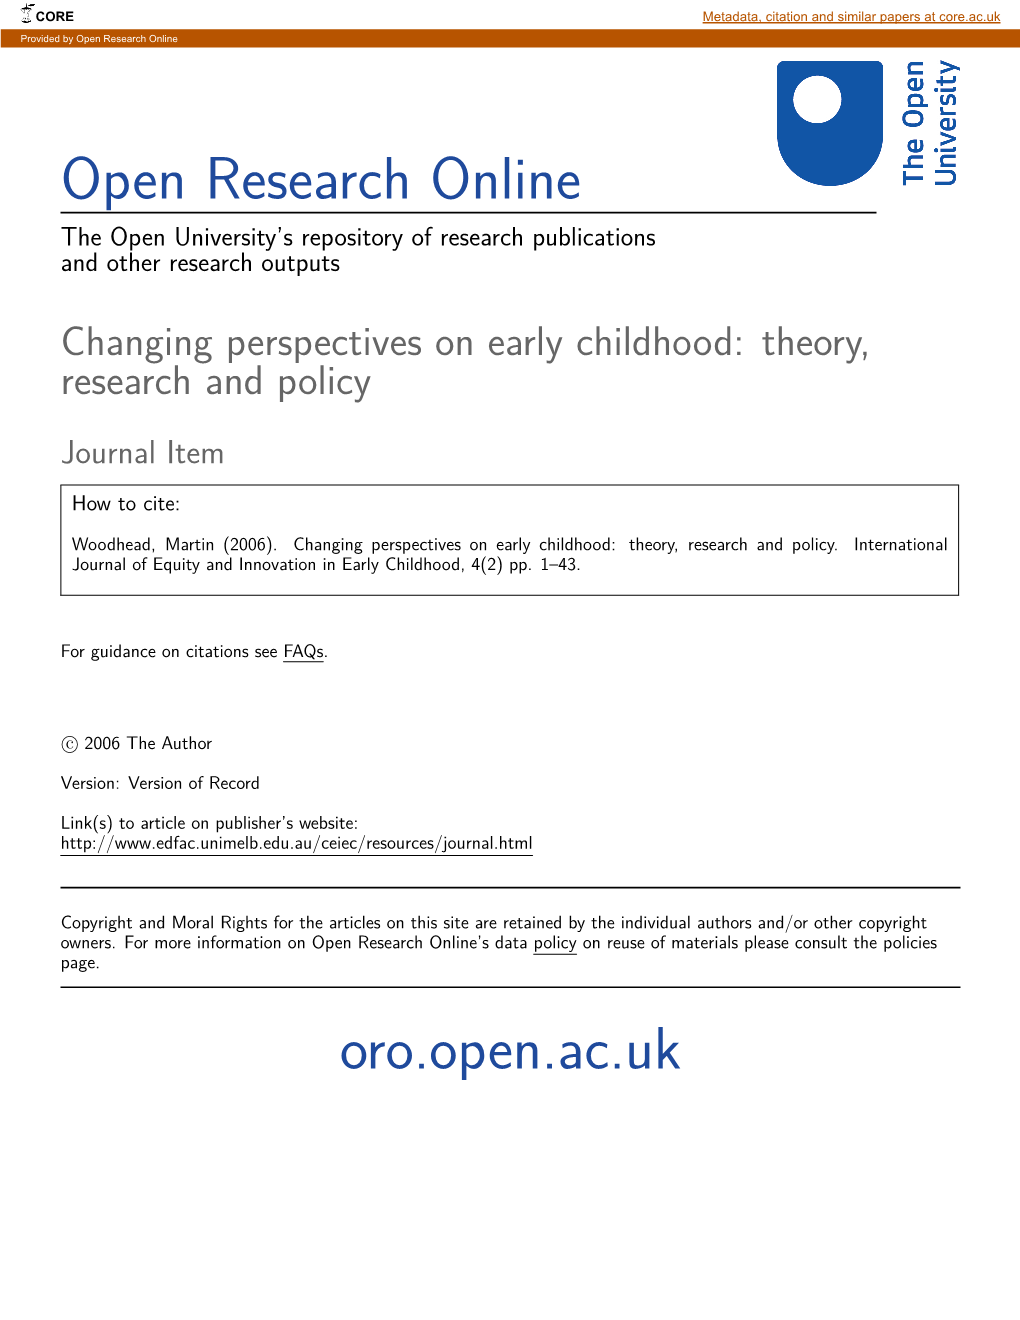 Changing Perspectives on Early Childhood: Theory, Research and Policy